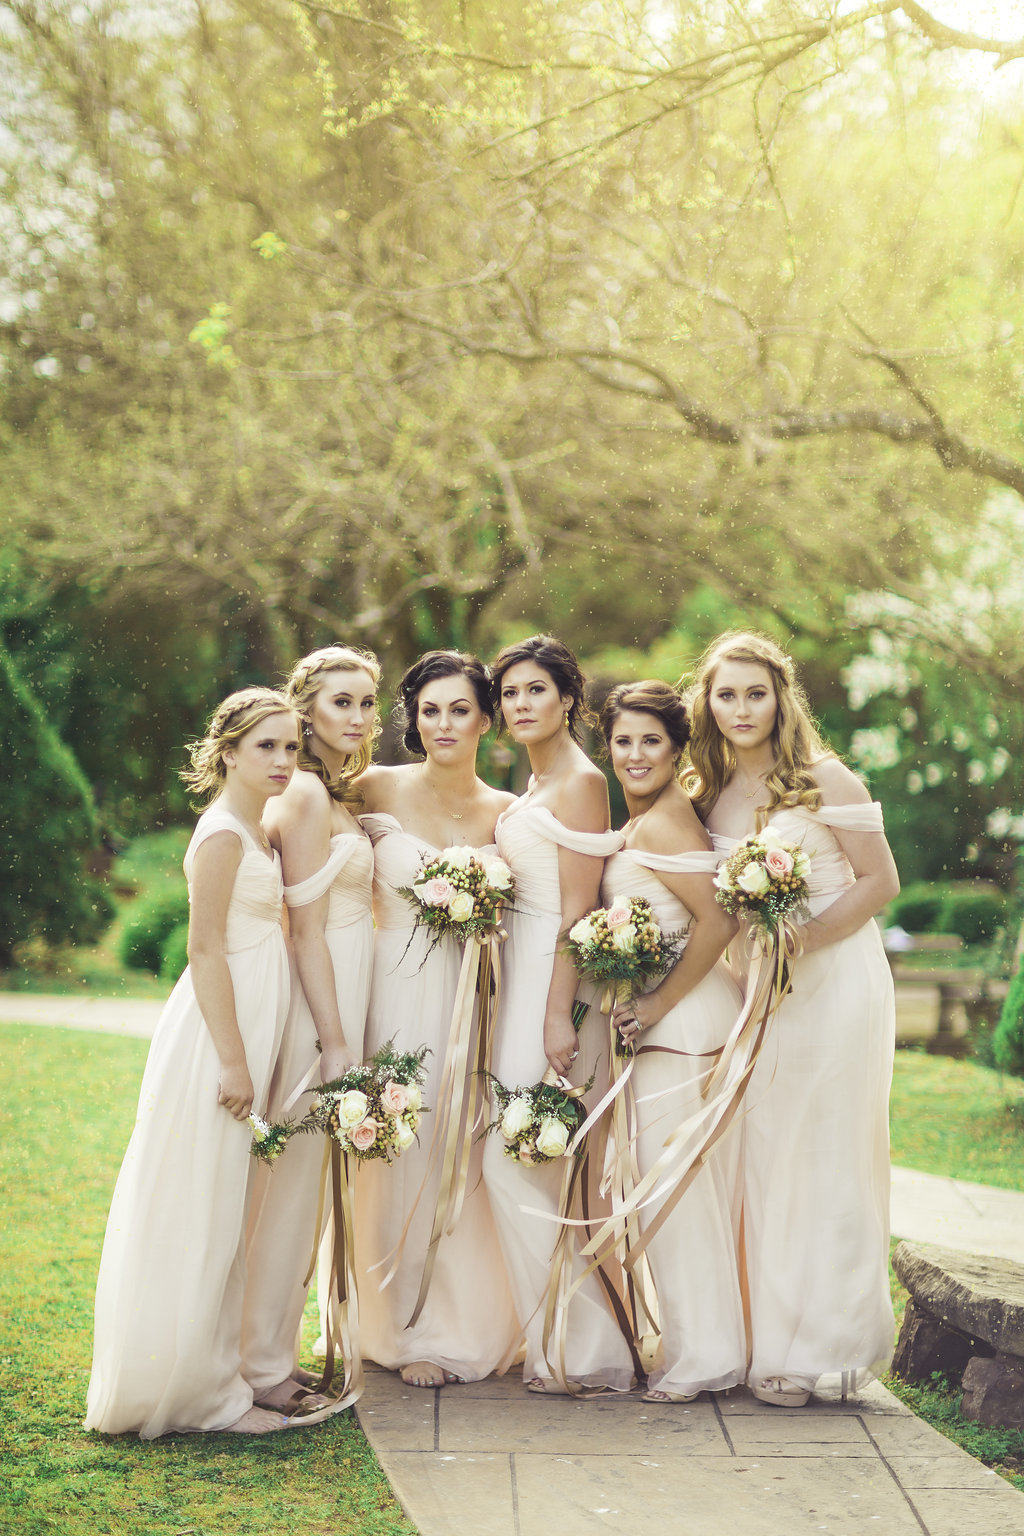 Wedding Photograph Of Bridesmaid Holding Flower Bouquets Los Angeles